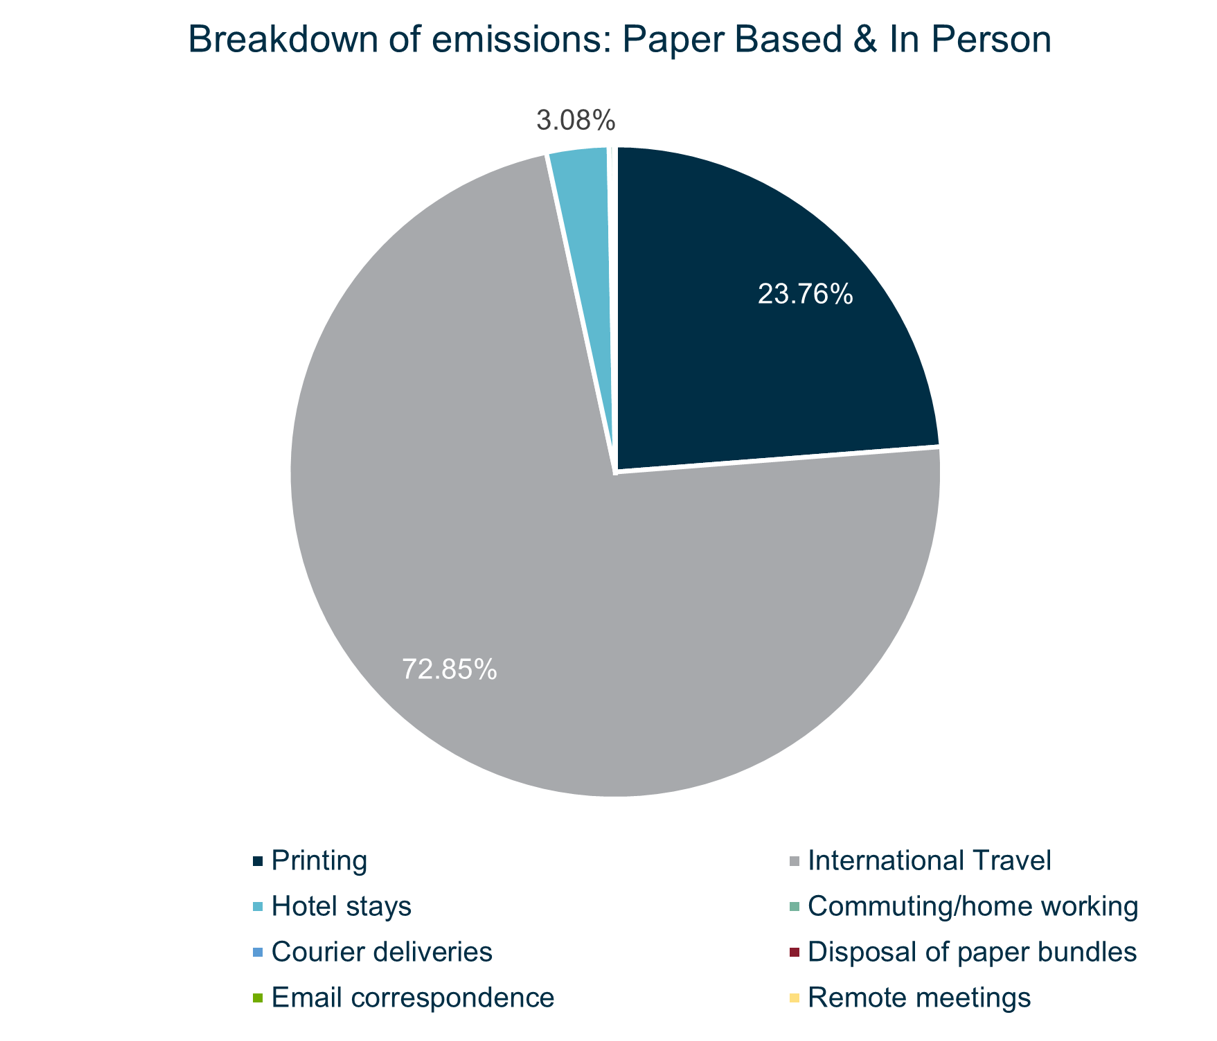 Breakdown of emissions: Paper Based & In Person